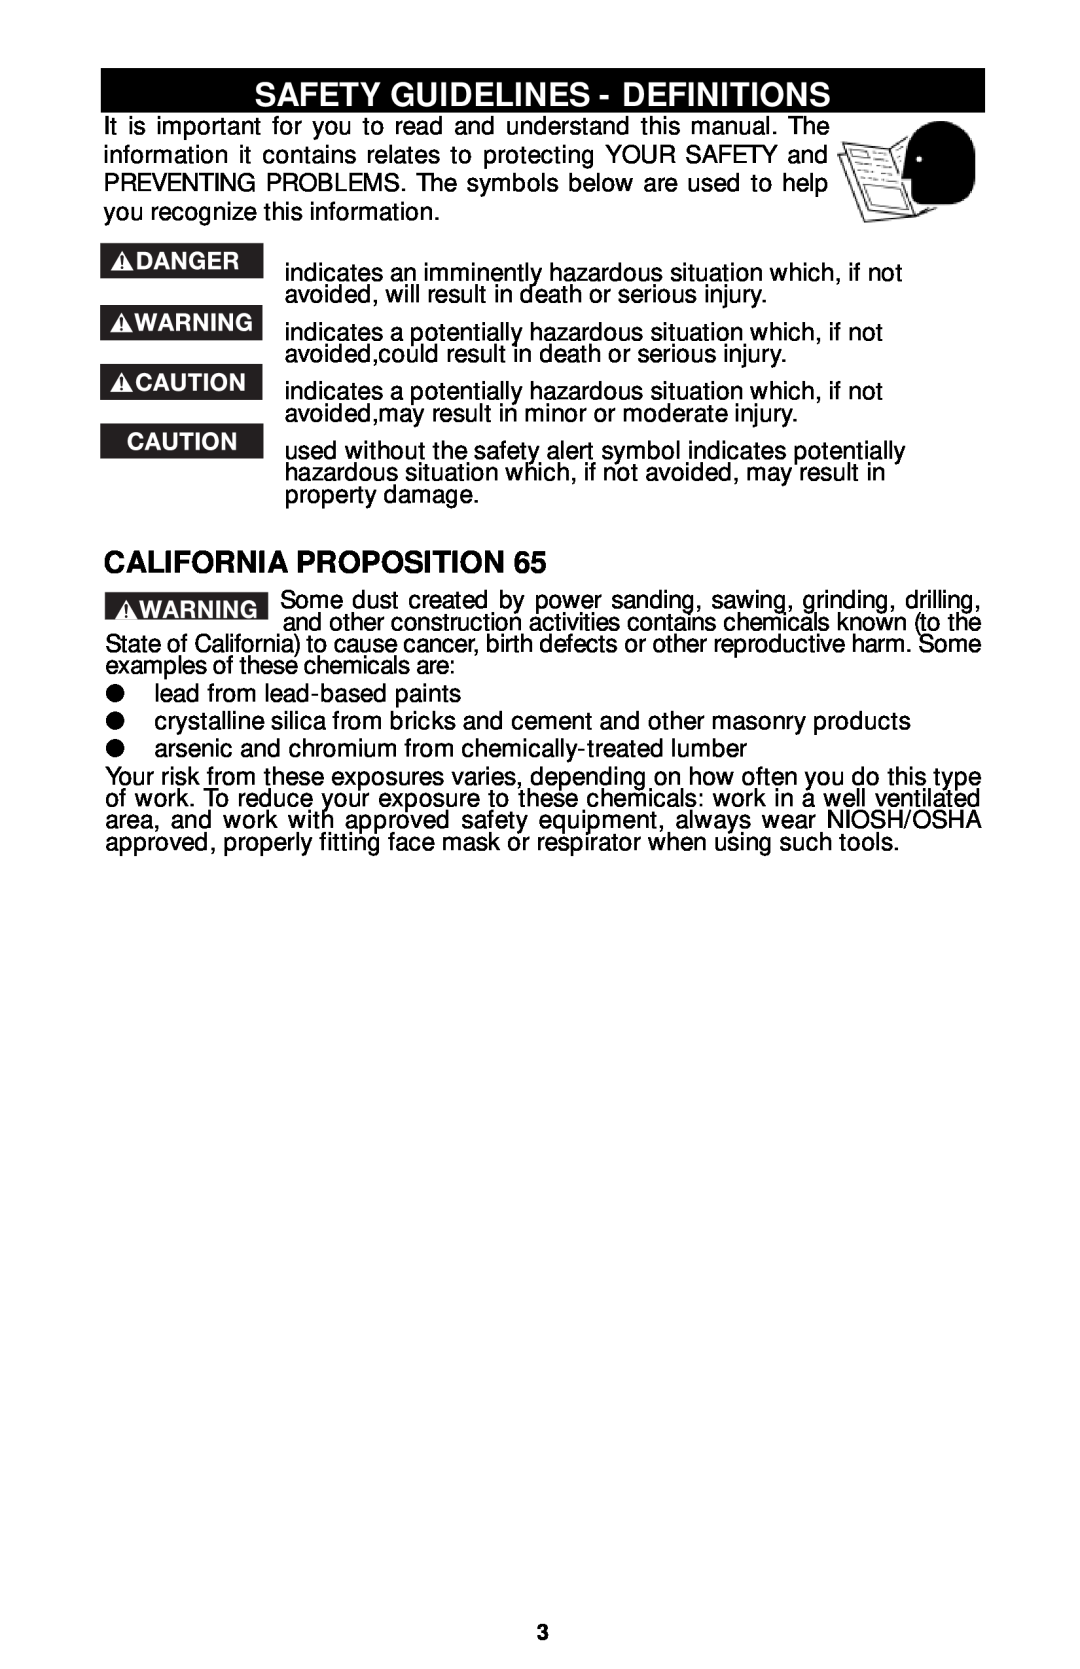 Porter-Cable 7312, 7310, 7320, 7319 instruction manual Safety Guidelines - Definitions, California Proposition 